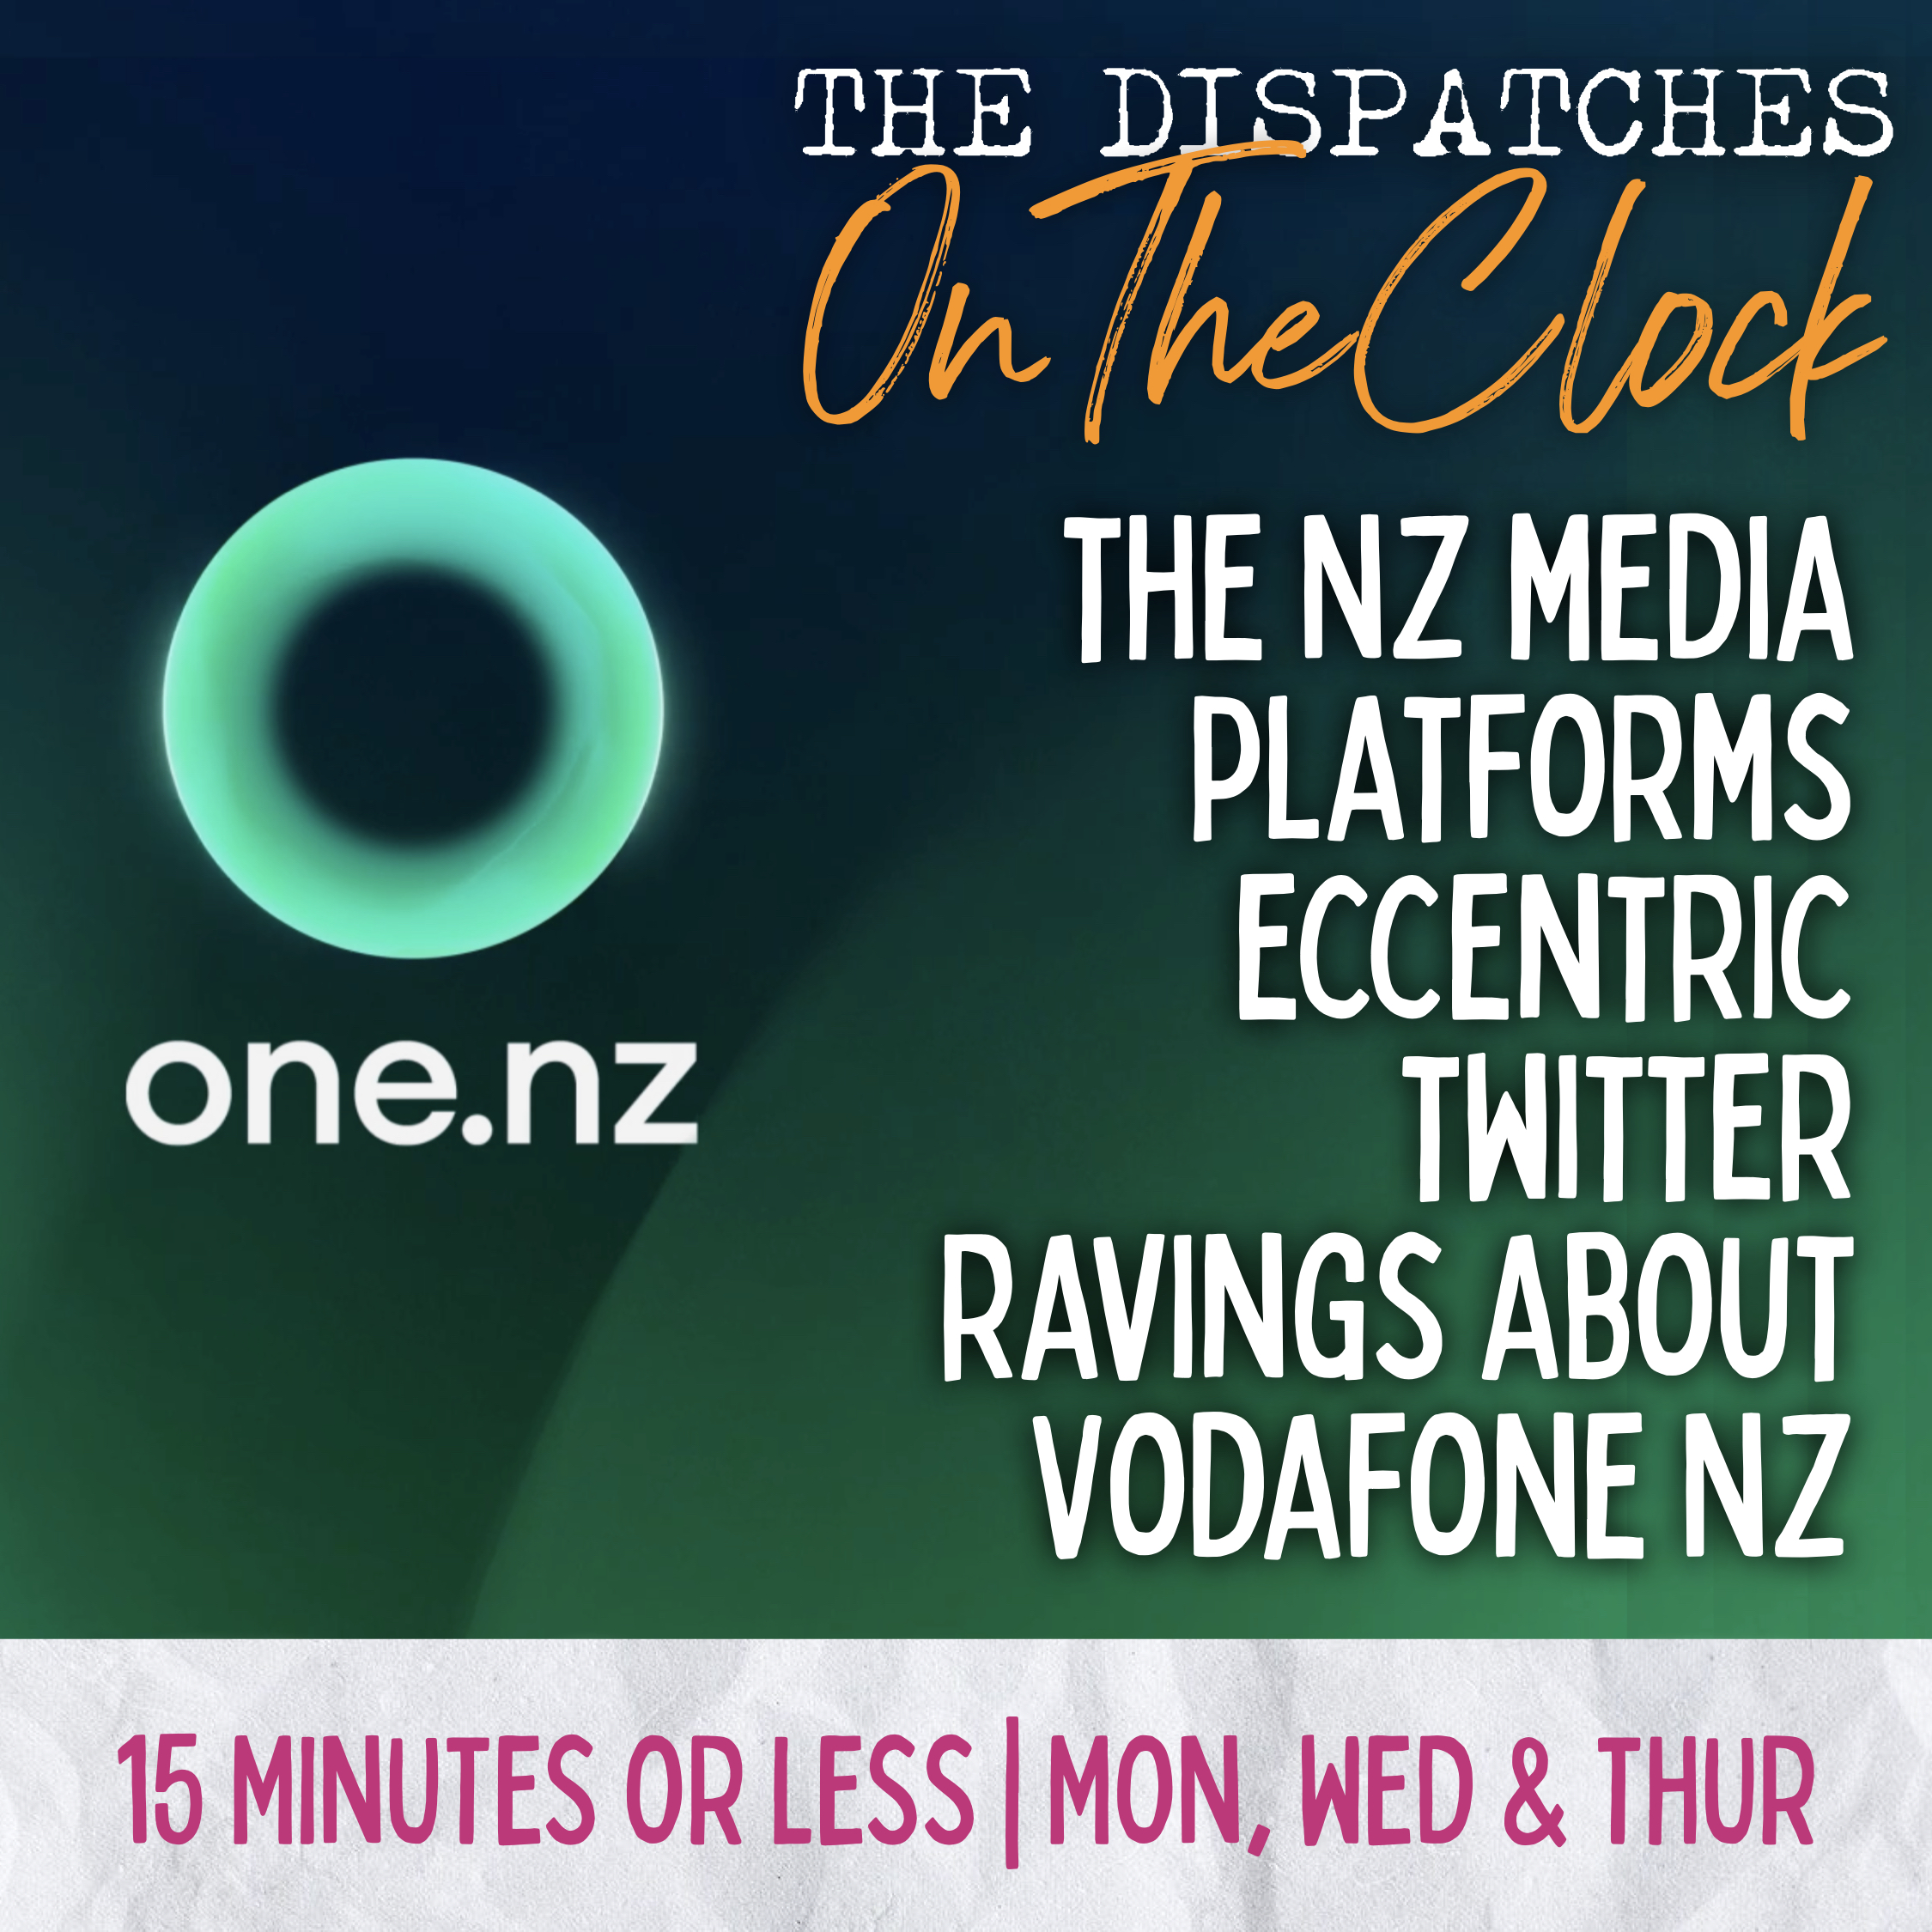 ON THE CLOCK | The NZ Media Platforms Absurd Twitter Accusations Against Vodafone